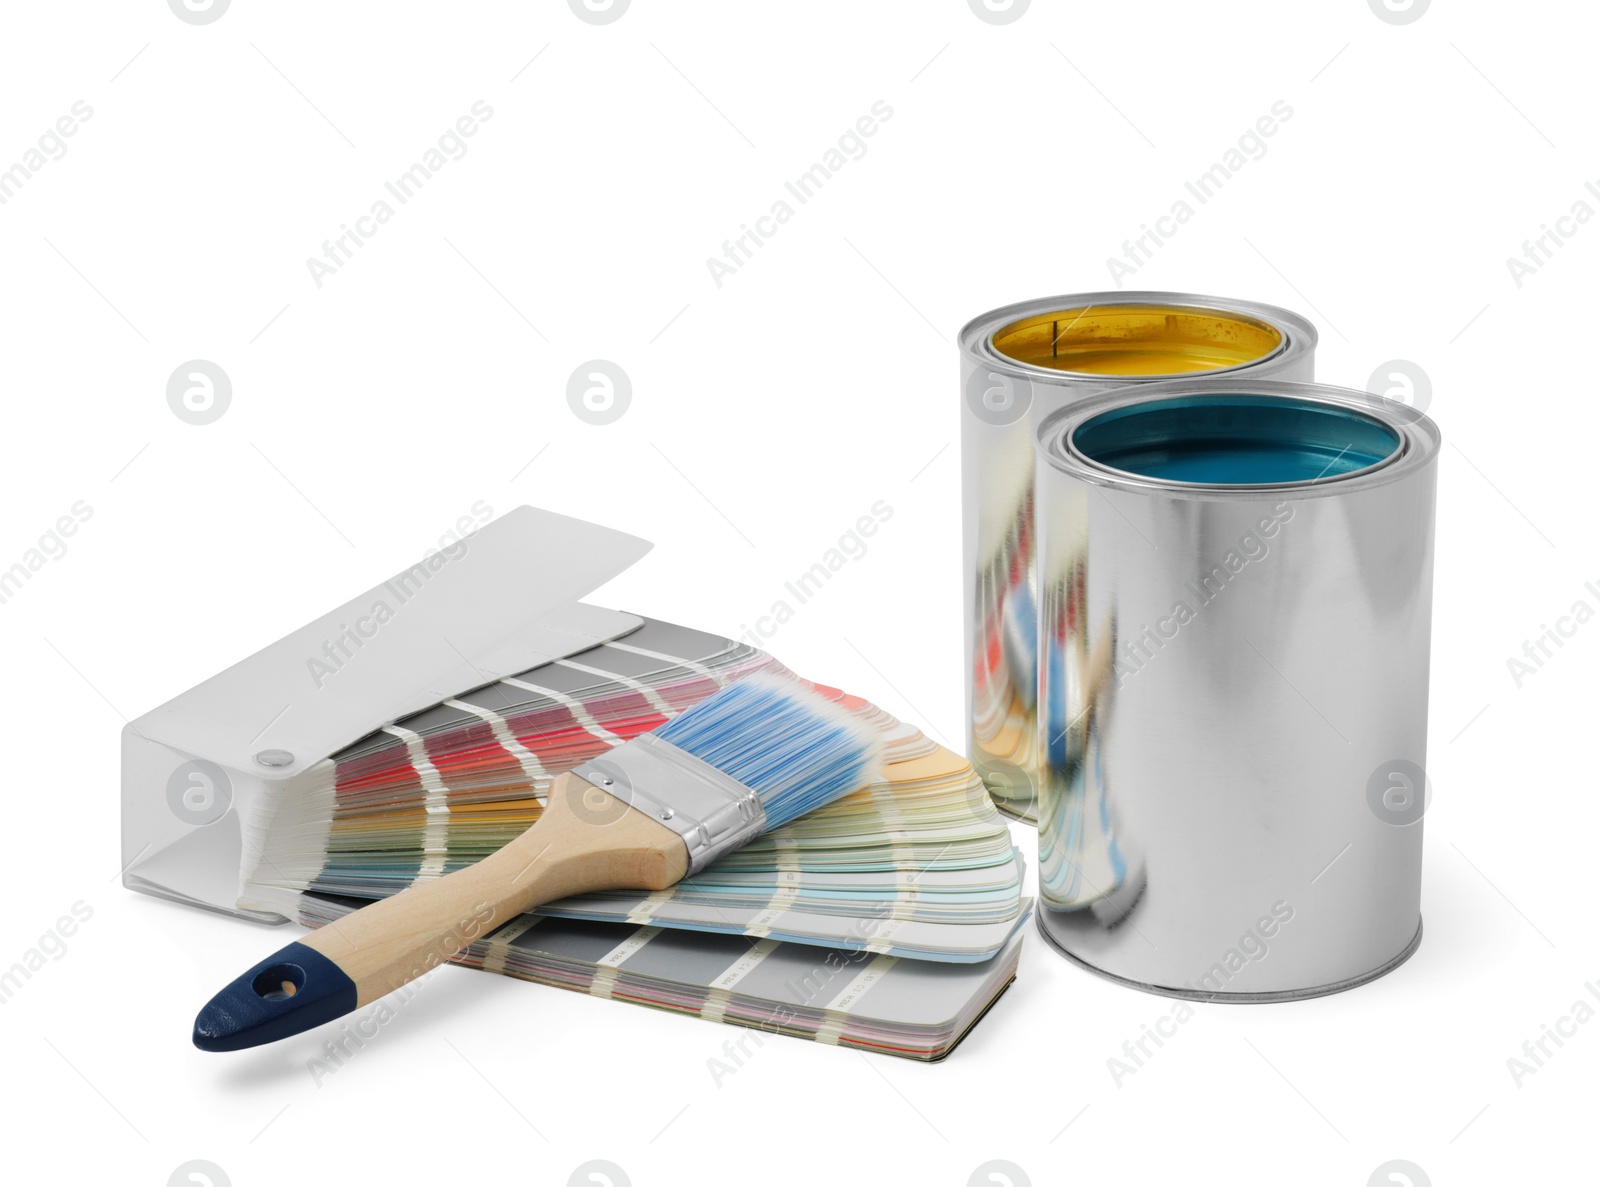 Photo of Paint cans, brush and palette on white background